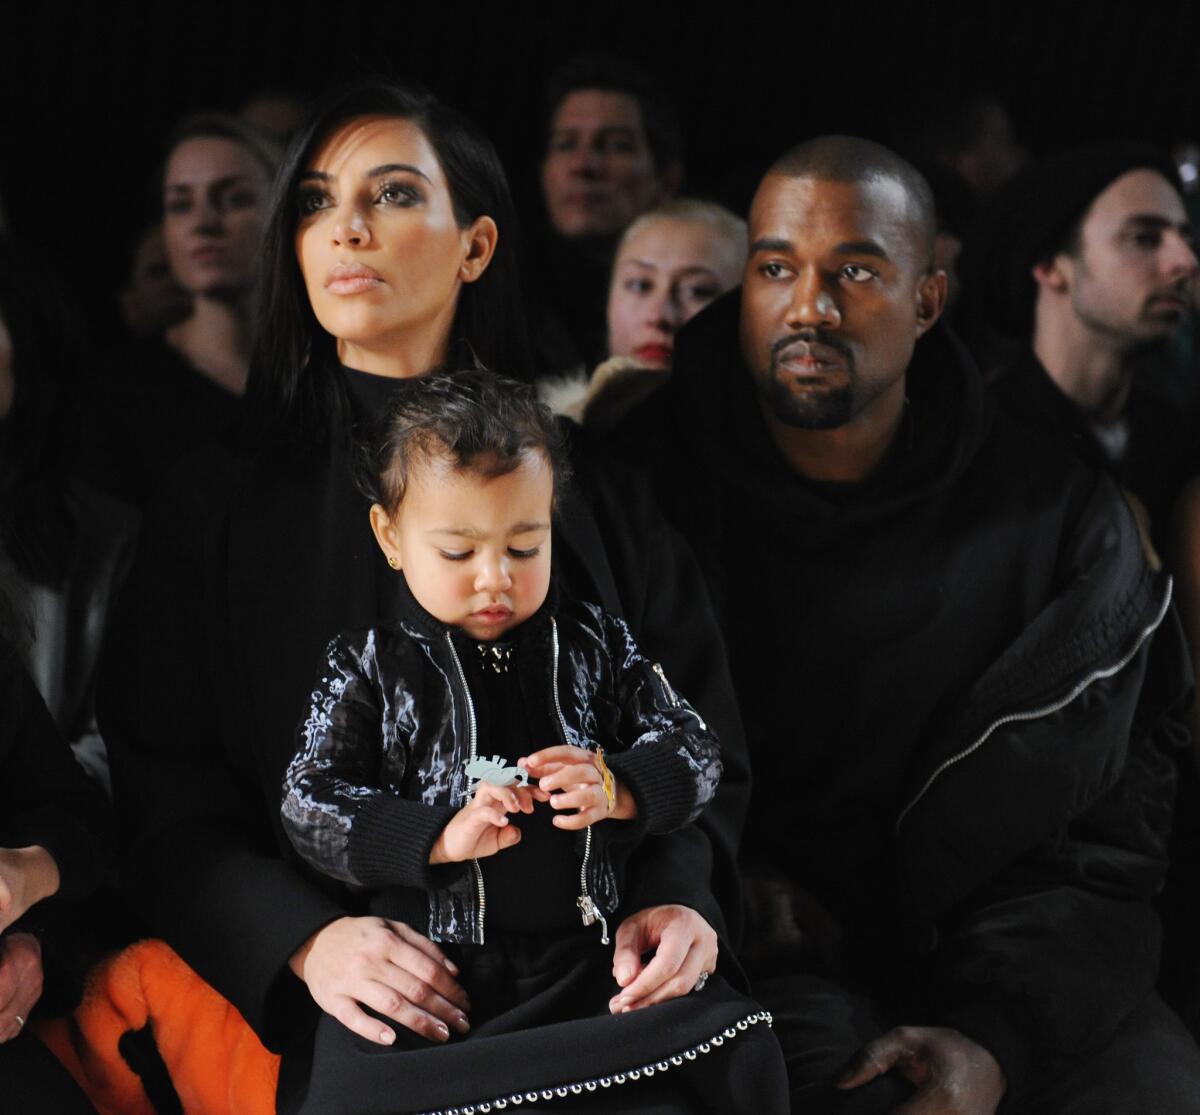 Kim Kardashian, North West and Kanye West attend the Alexander Wang fashion show at Pier 94 on Feb. 14 during New York Fashion Week.